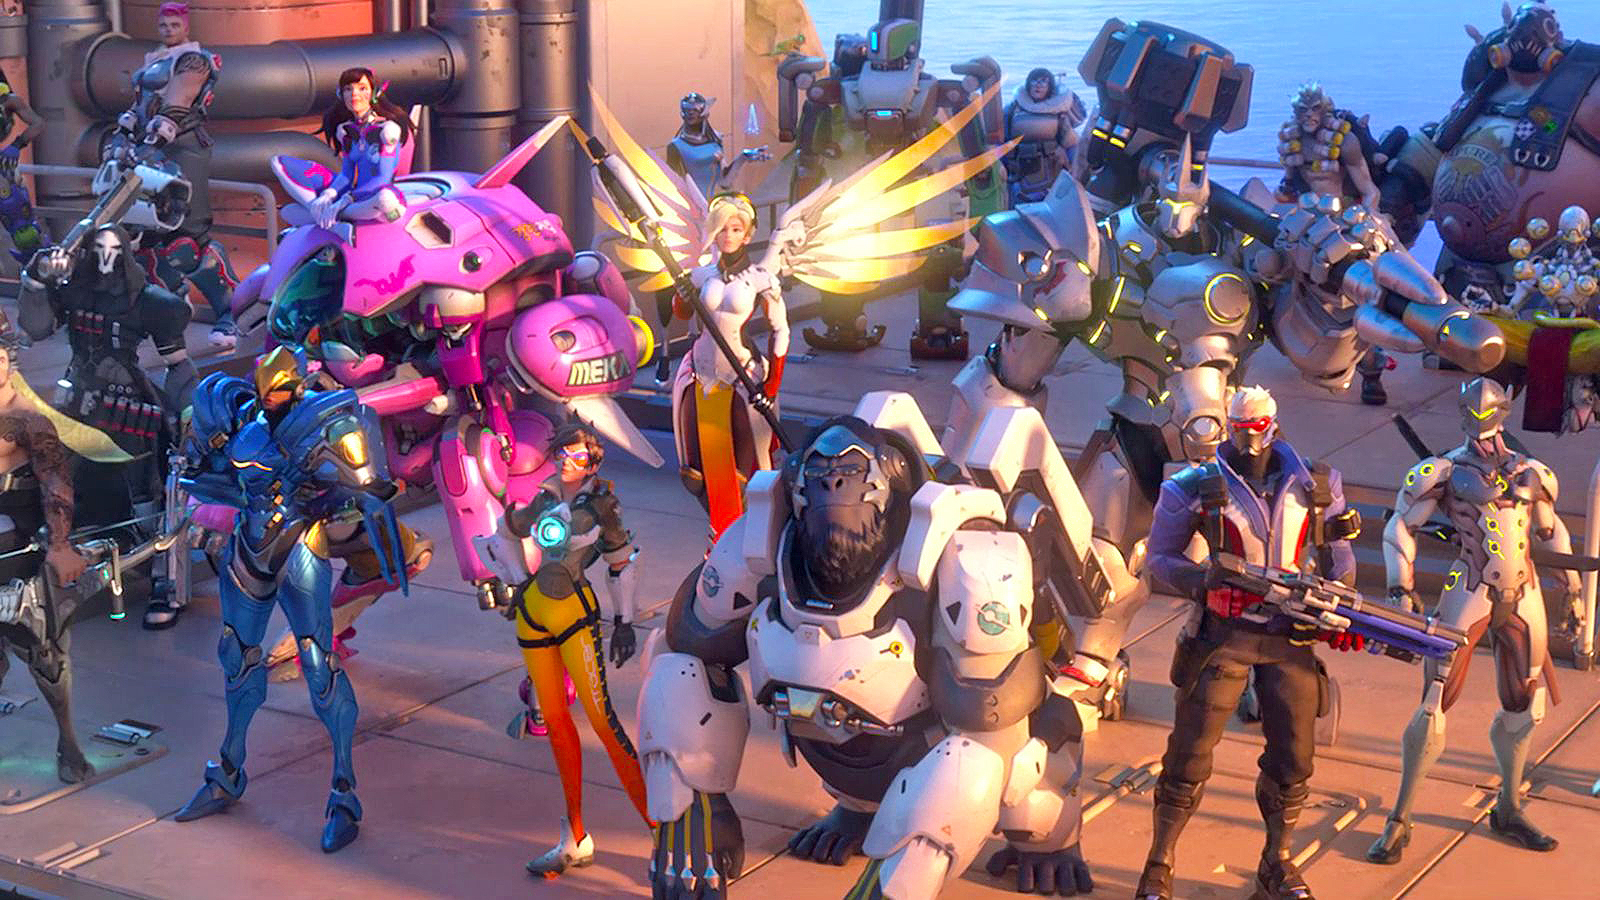 Playing Heroes of the Storm gets Overwatch fans a special skin - Polygon